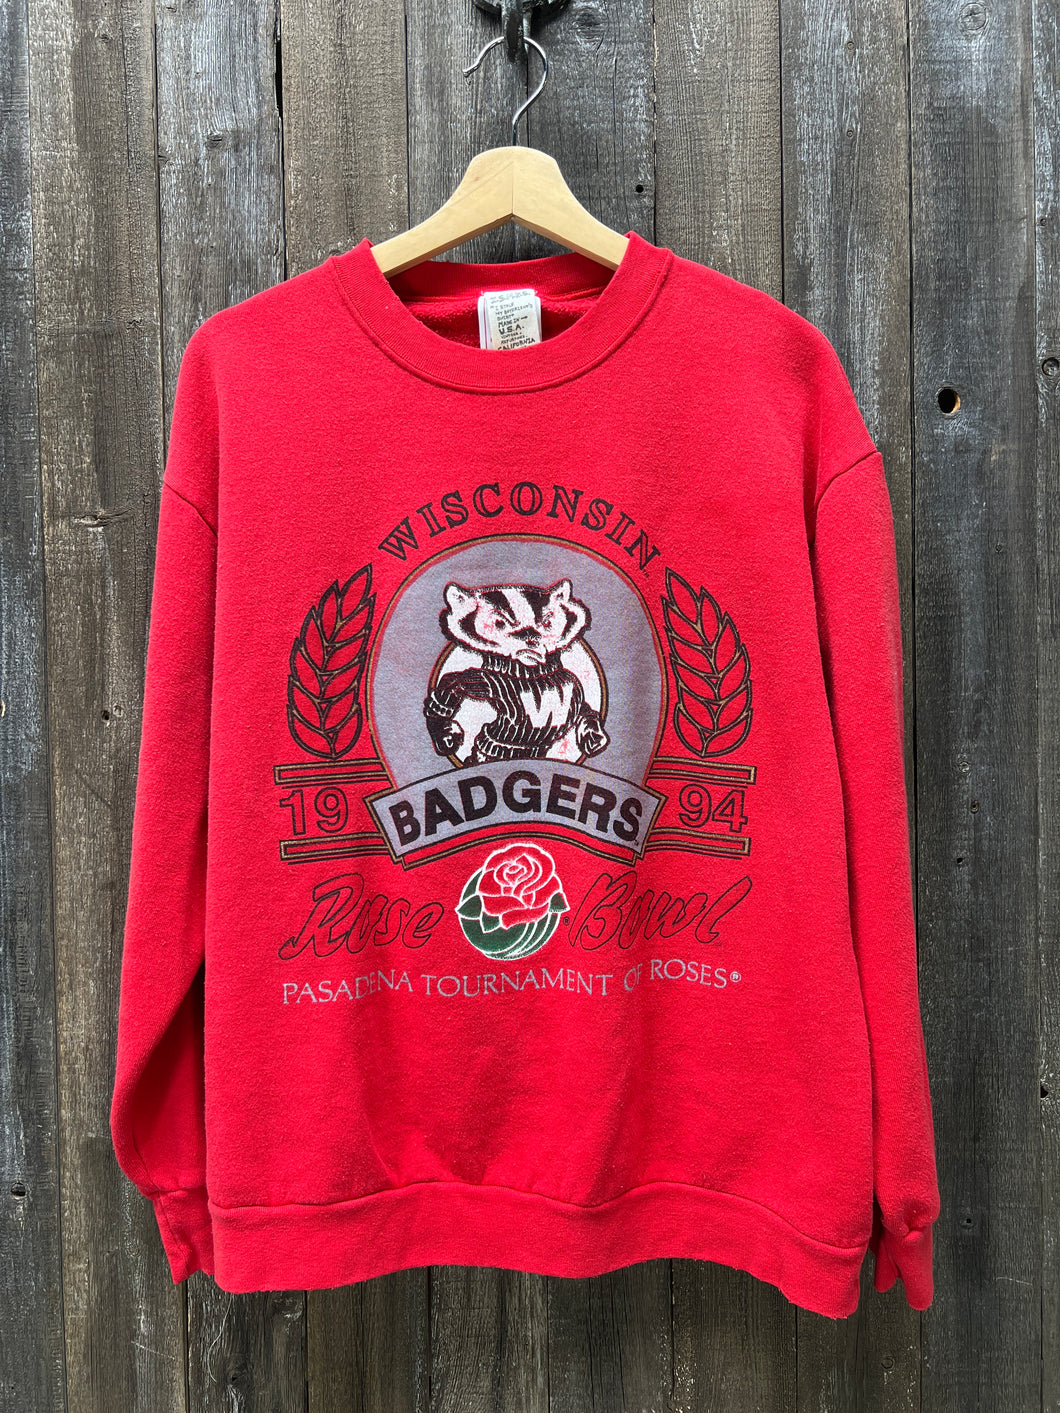 Wisconsin Badgers Sweatshirt -L-Customize Your Embroidery Wording